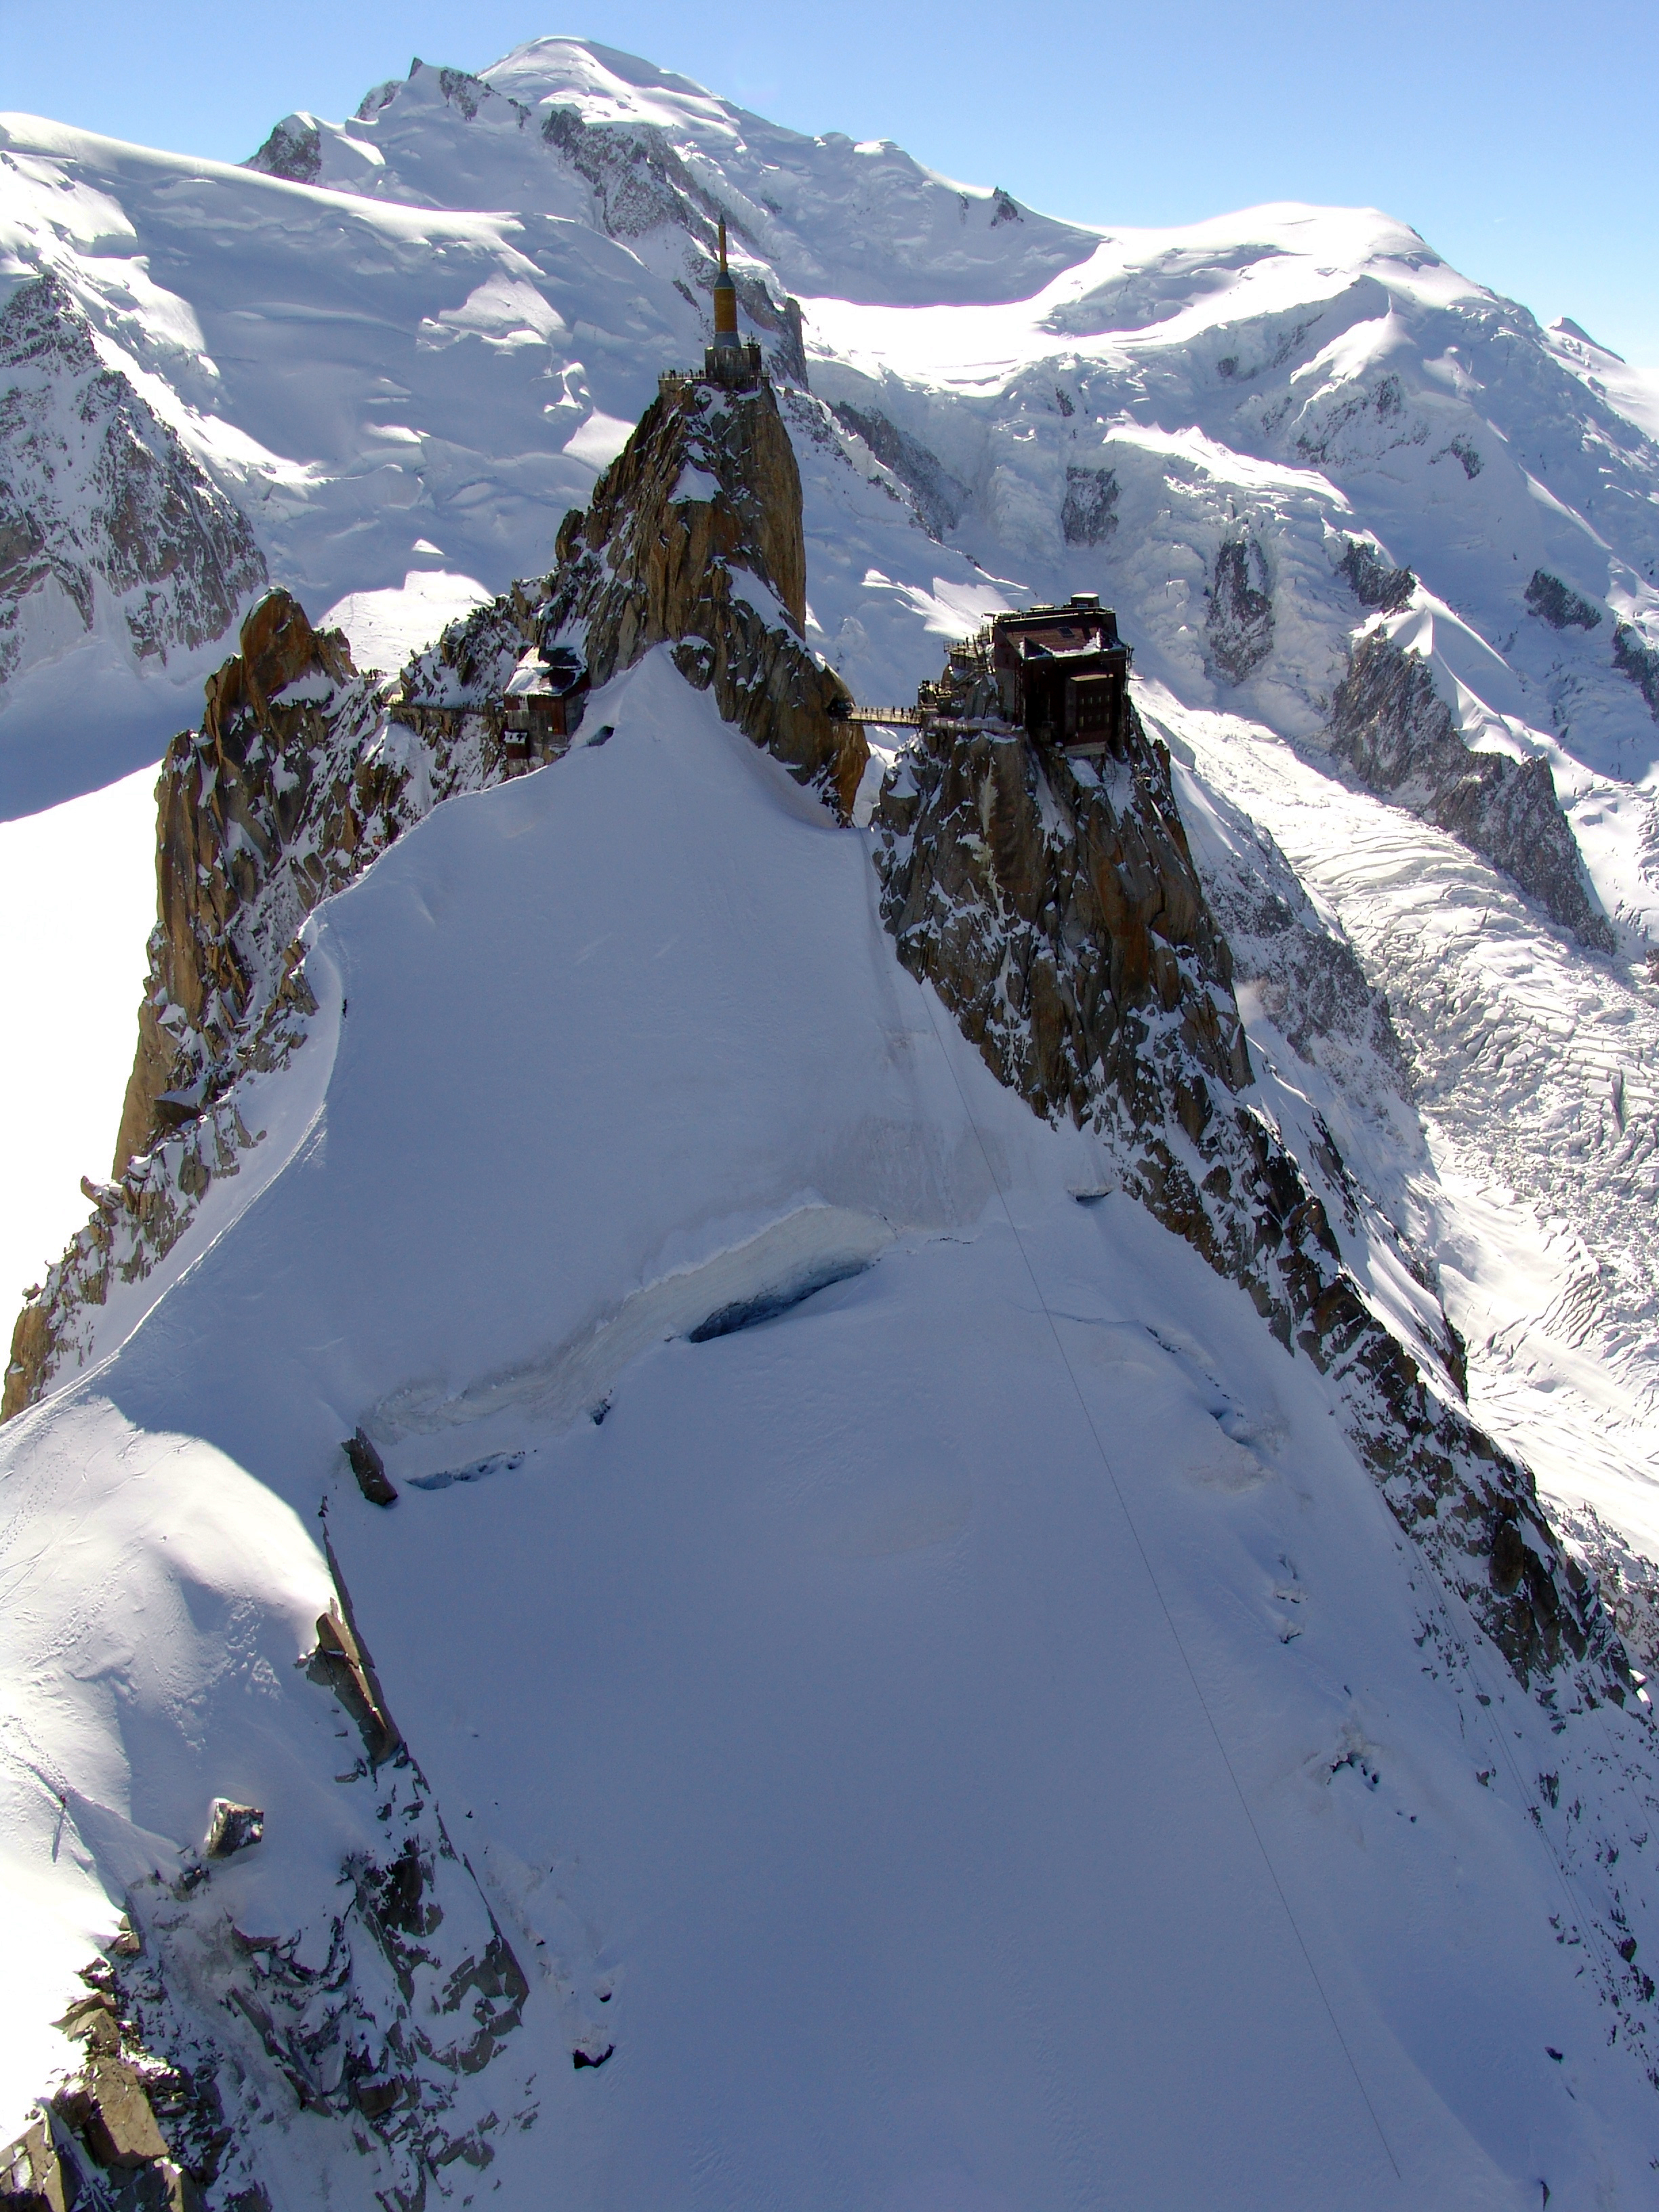 The_Aiguille_du_Midi_3842_m_a.s.l._seen_from_the_East_with_the_Mont_Blanc_summit_in_the_.JPG